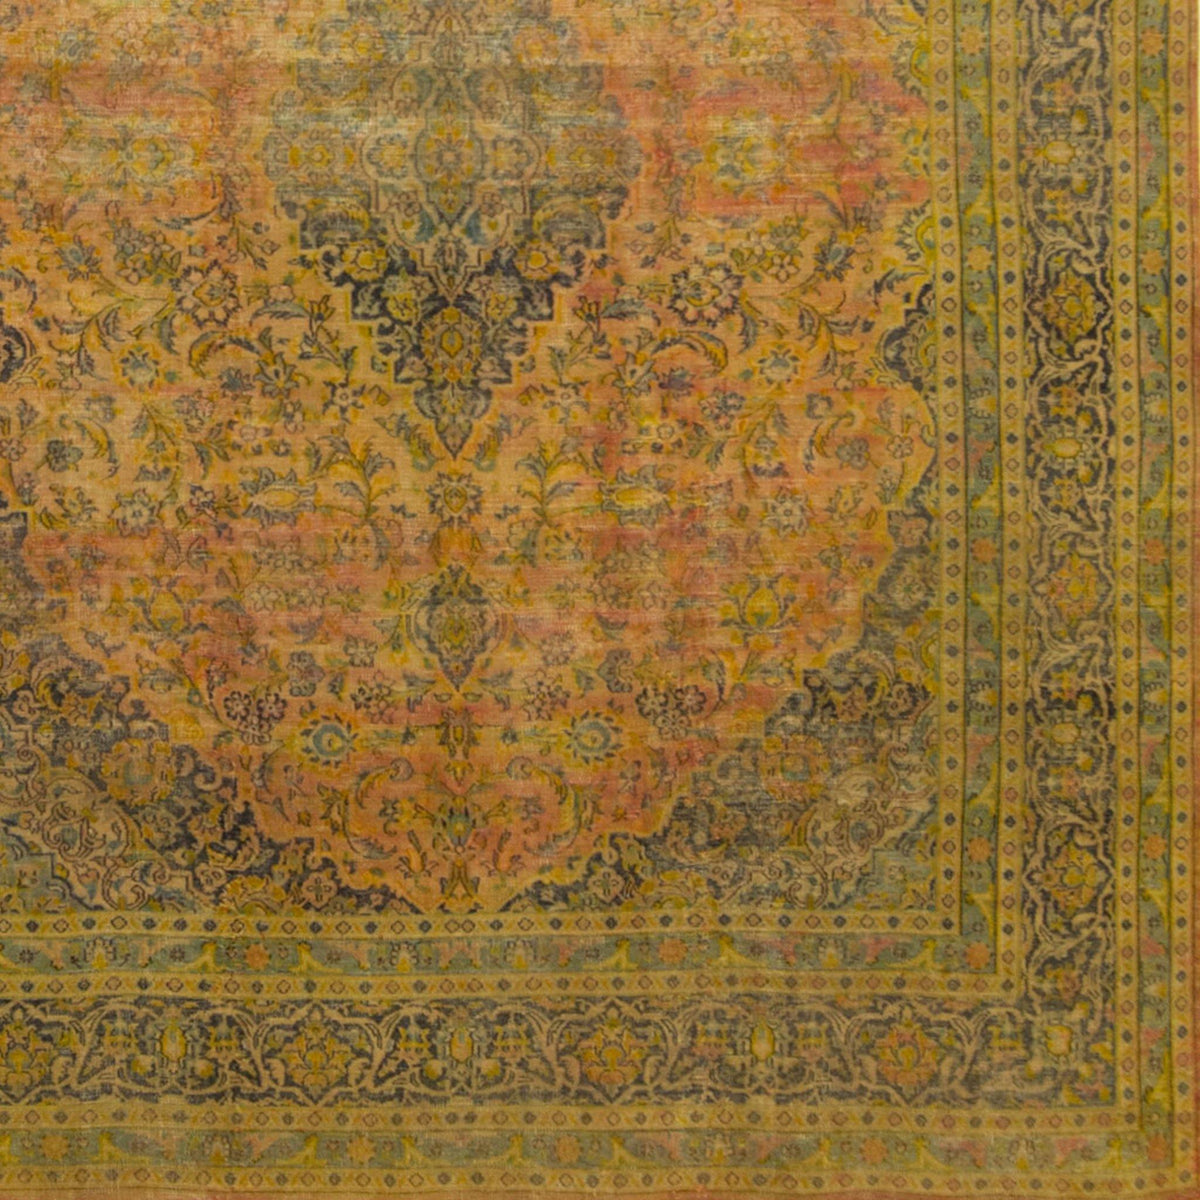 Over-dyed Vintage Persian Rug 243cm x 300cm